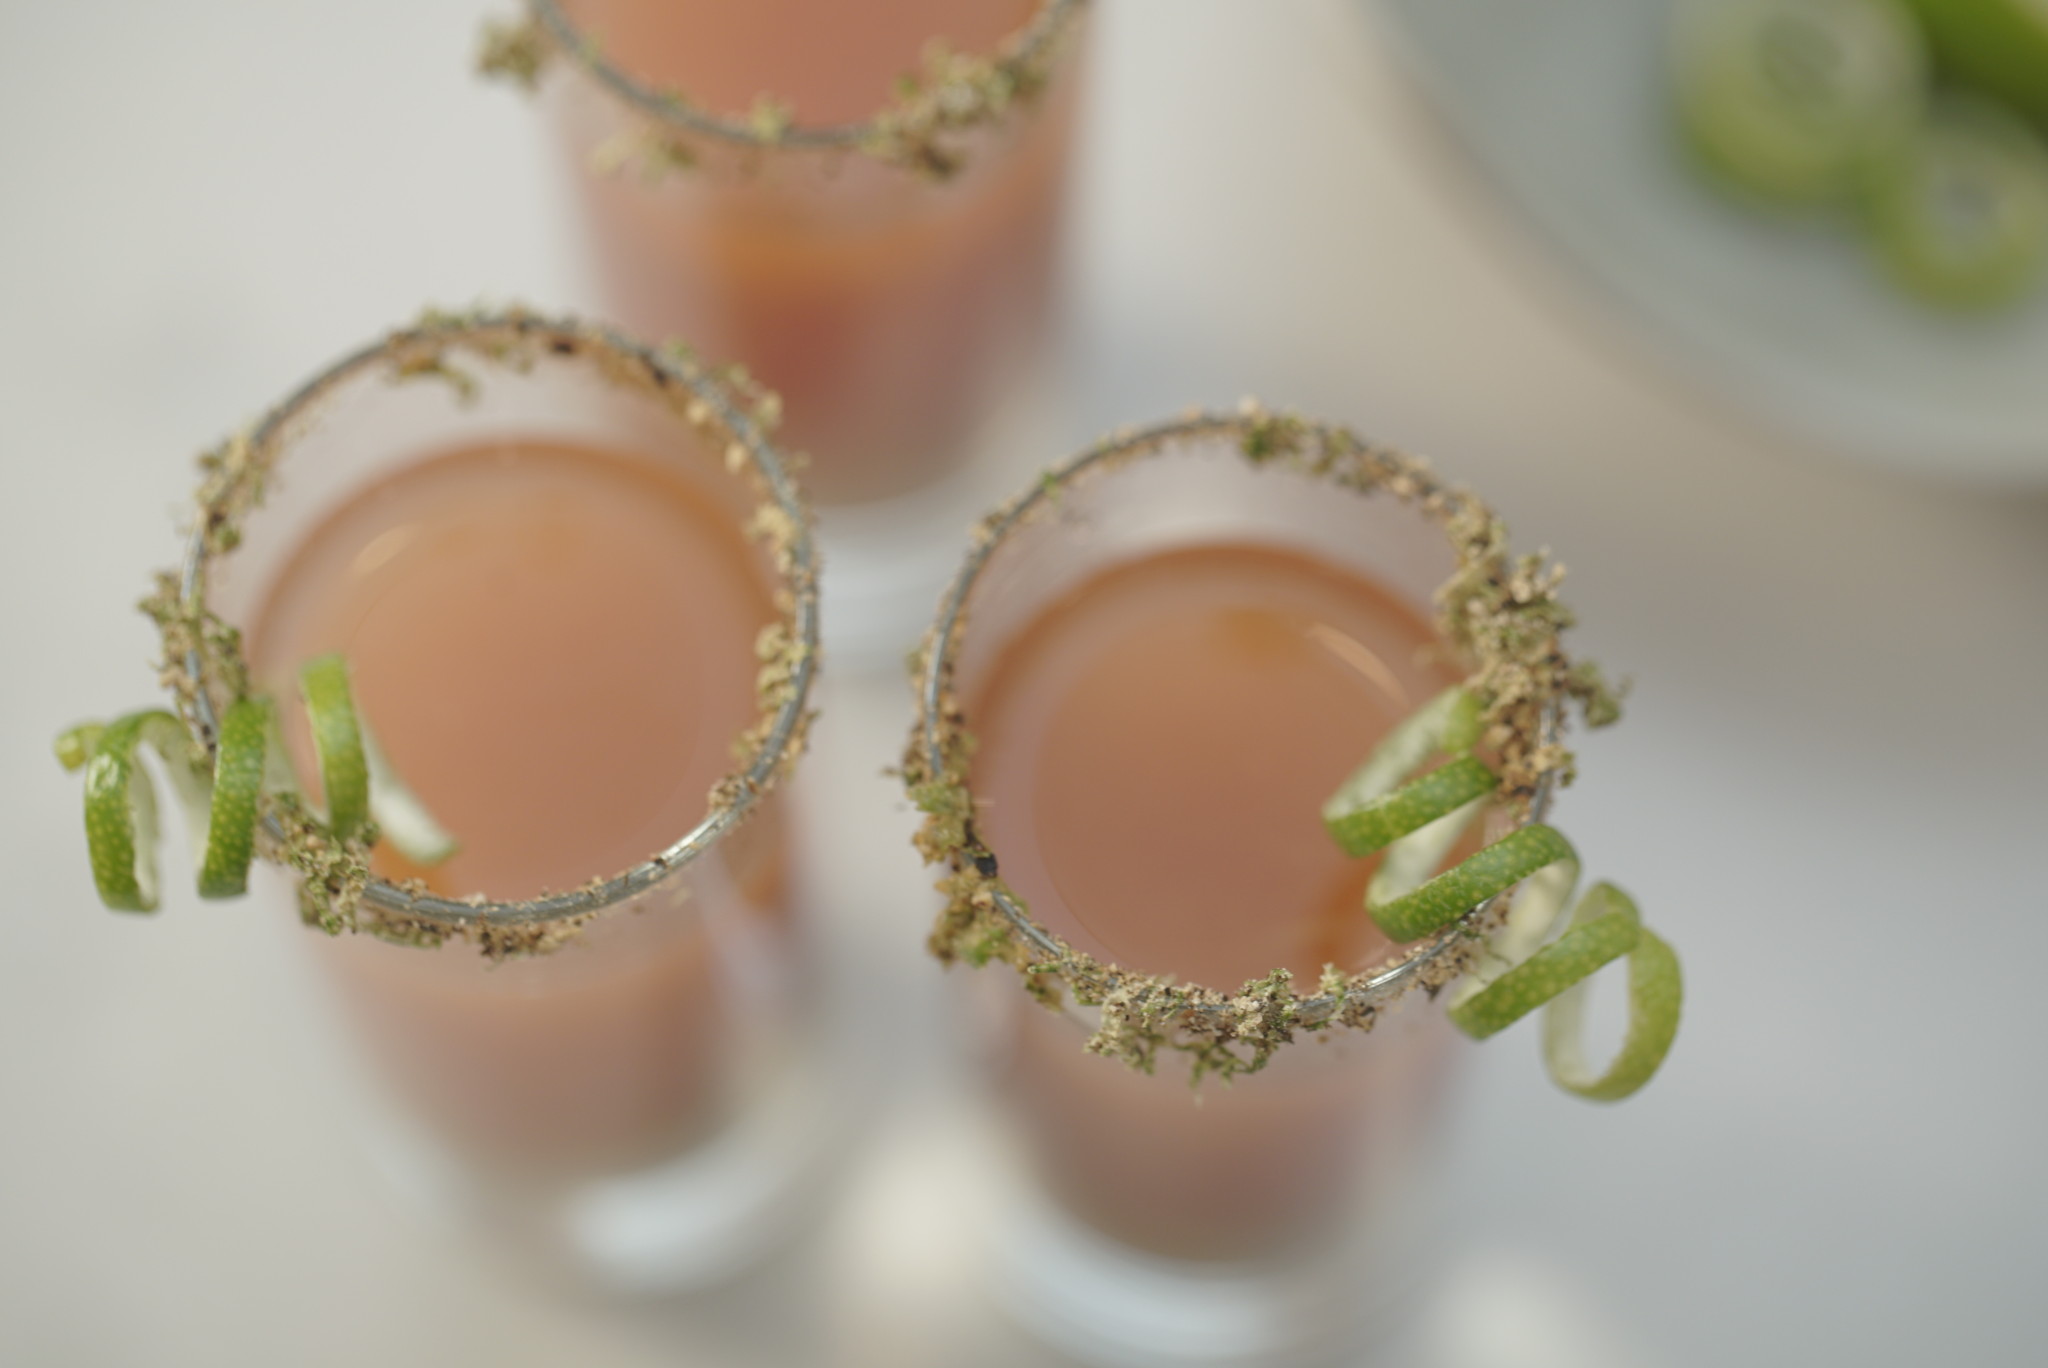 Bloody Rita Oyster Shooters